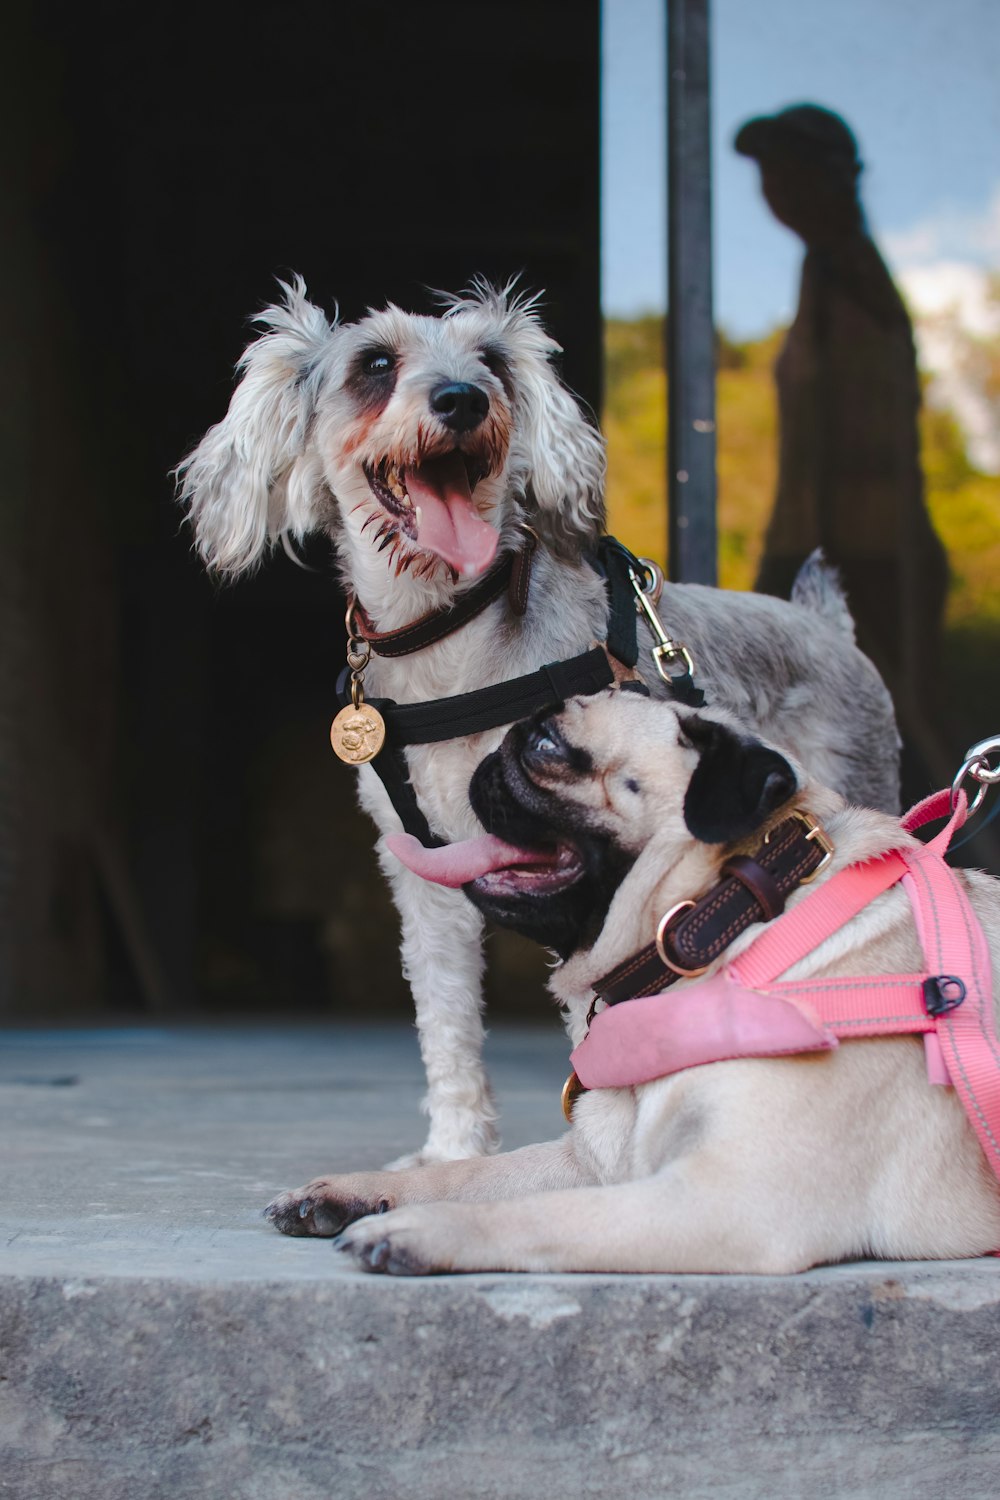 white and gray short coated small dog with pink harness